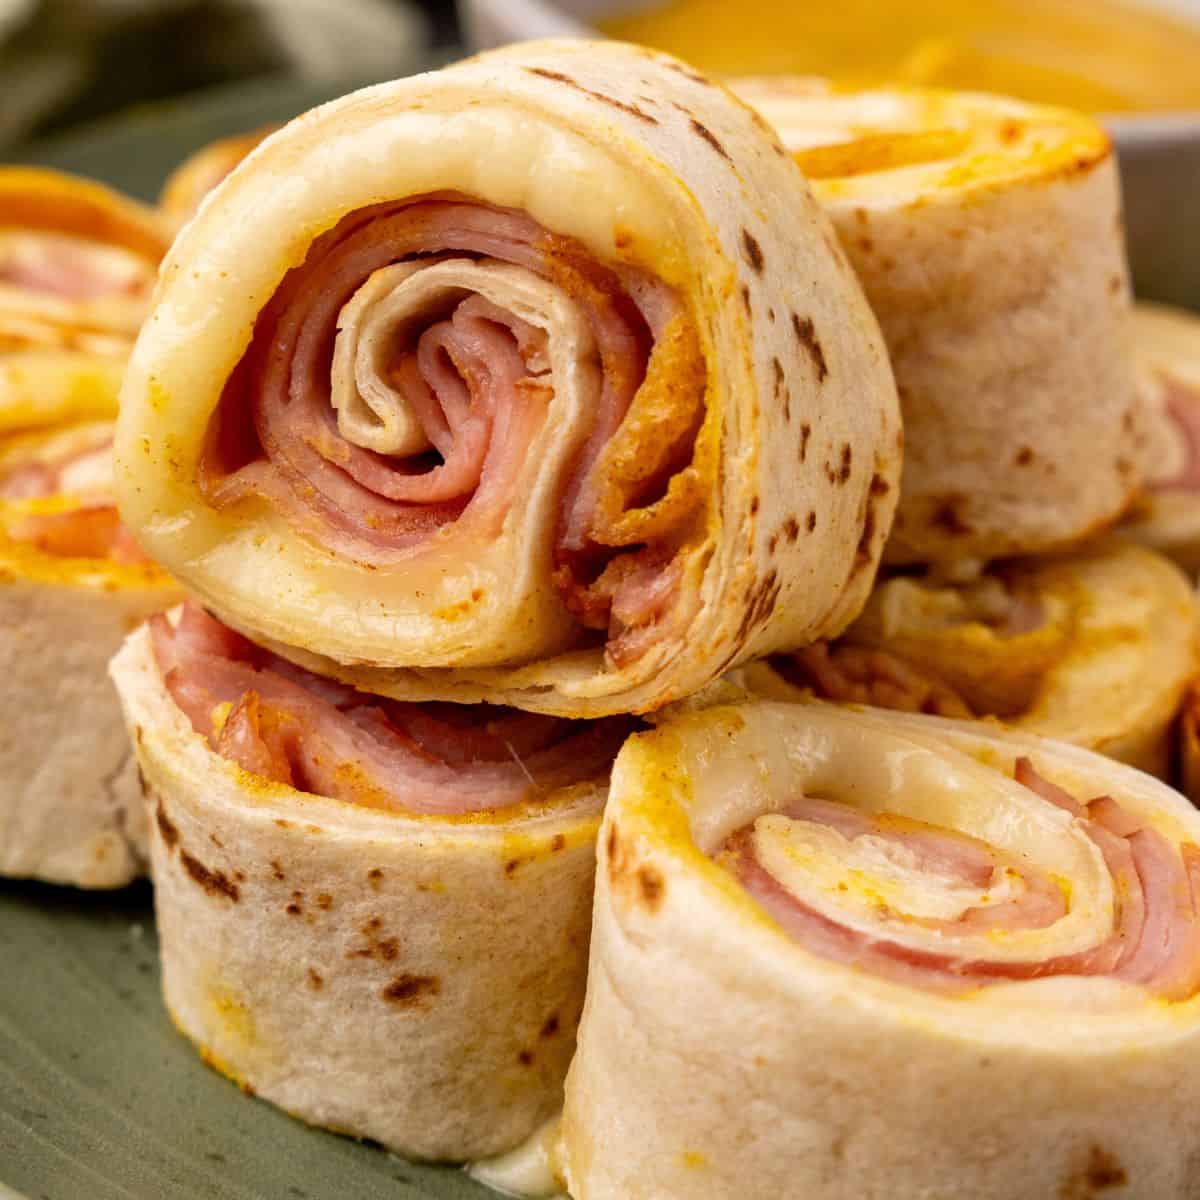 Ham and cheese wraps are neatly arranged on a plate.